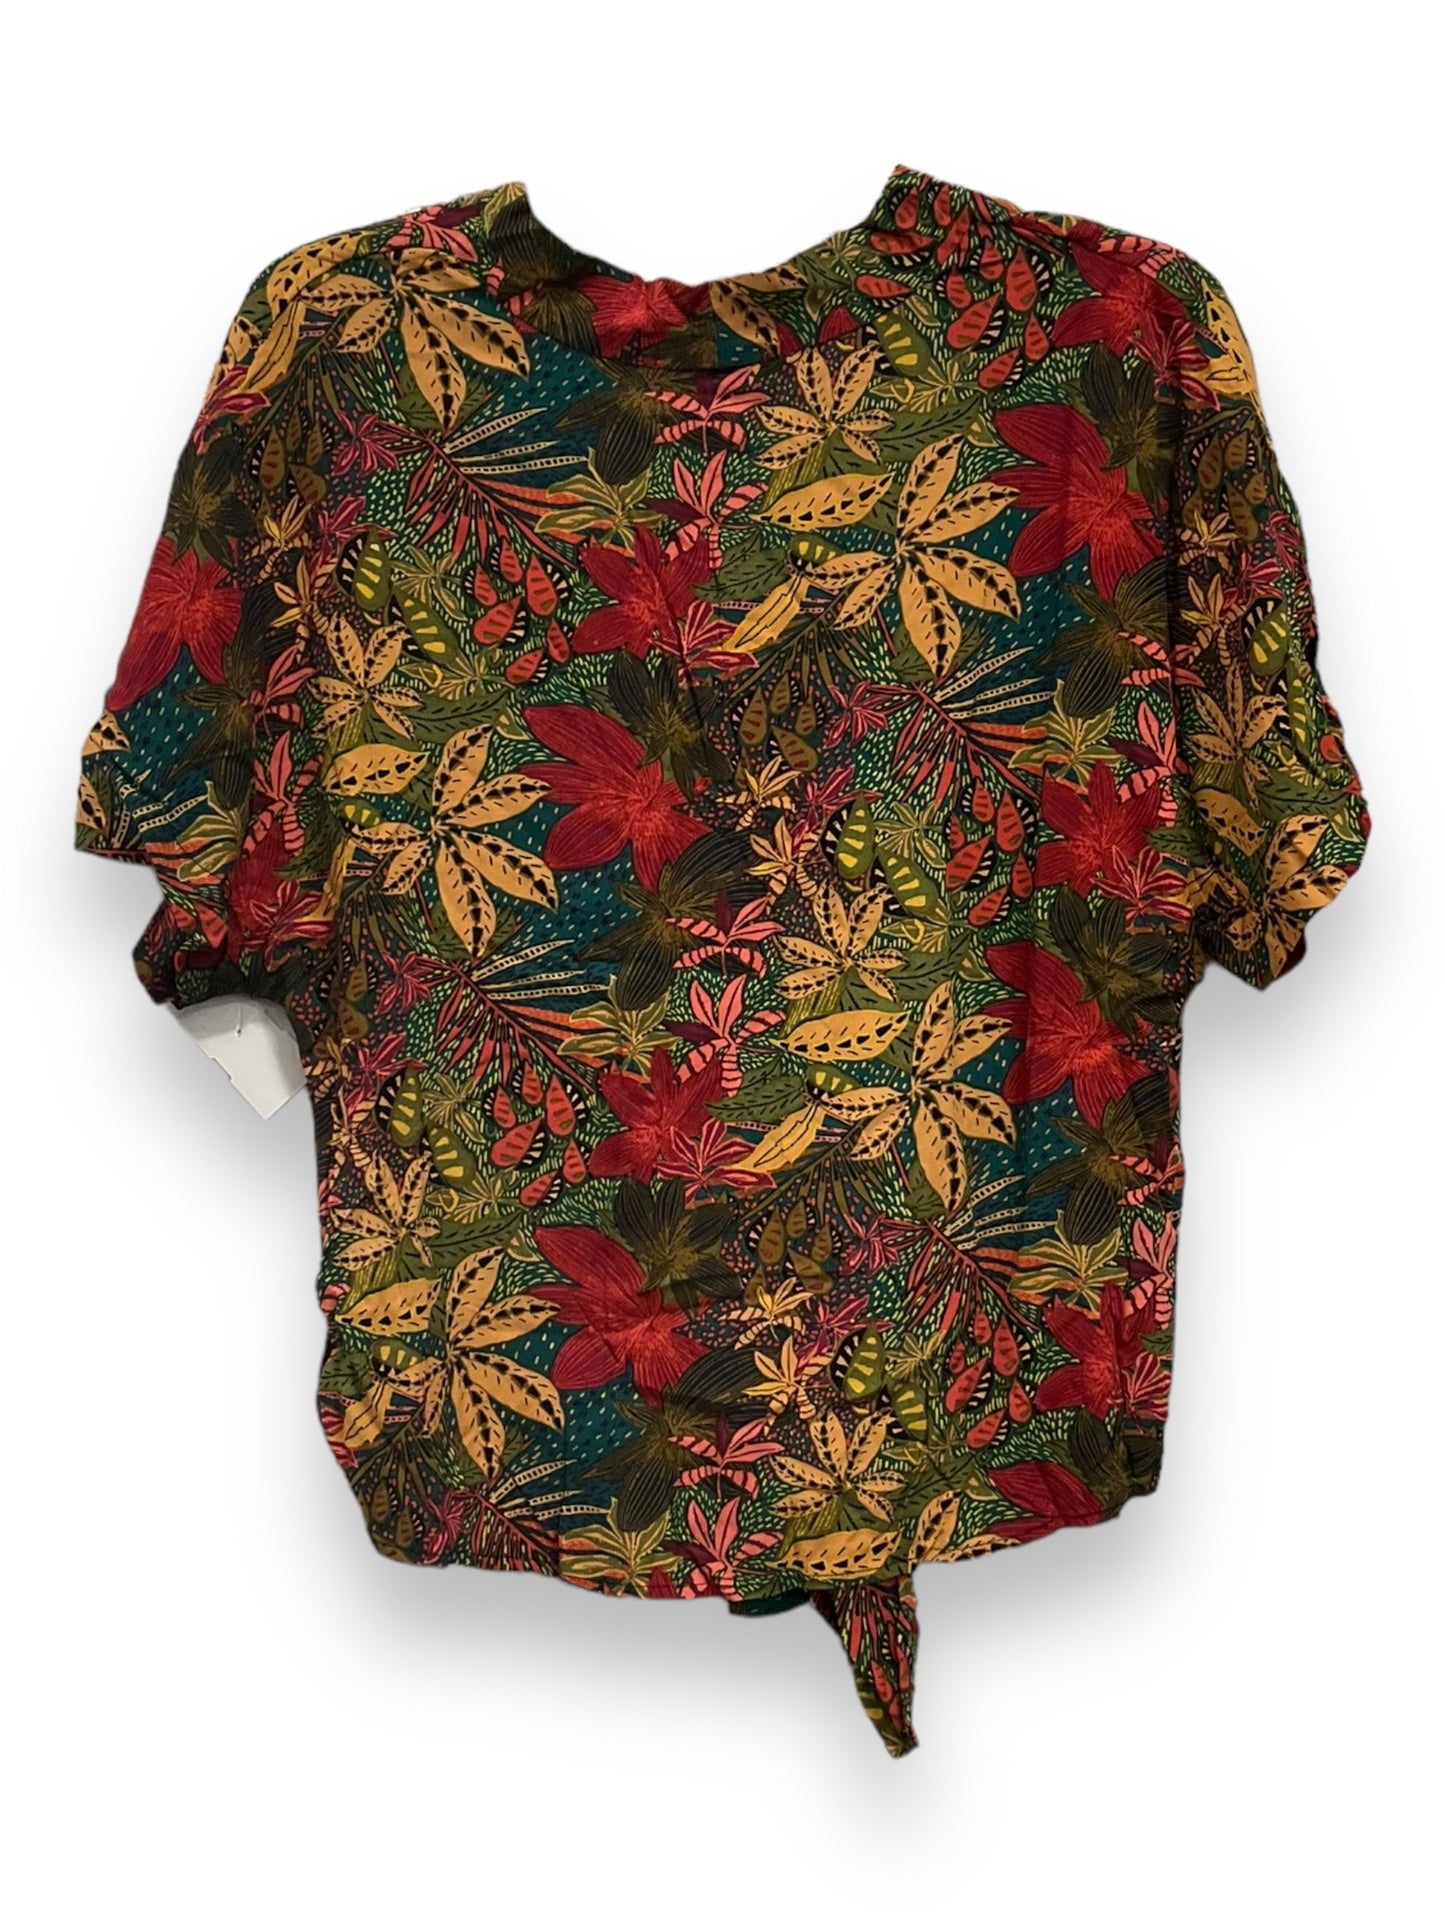 Floral Print Top Short Sleeve Evereve, Size Xs